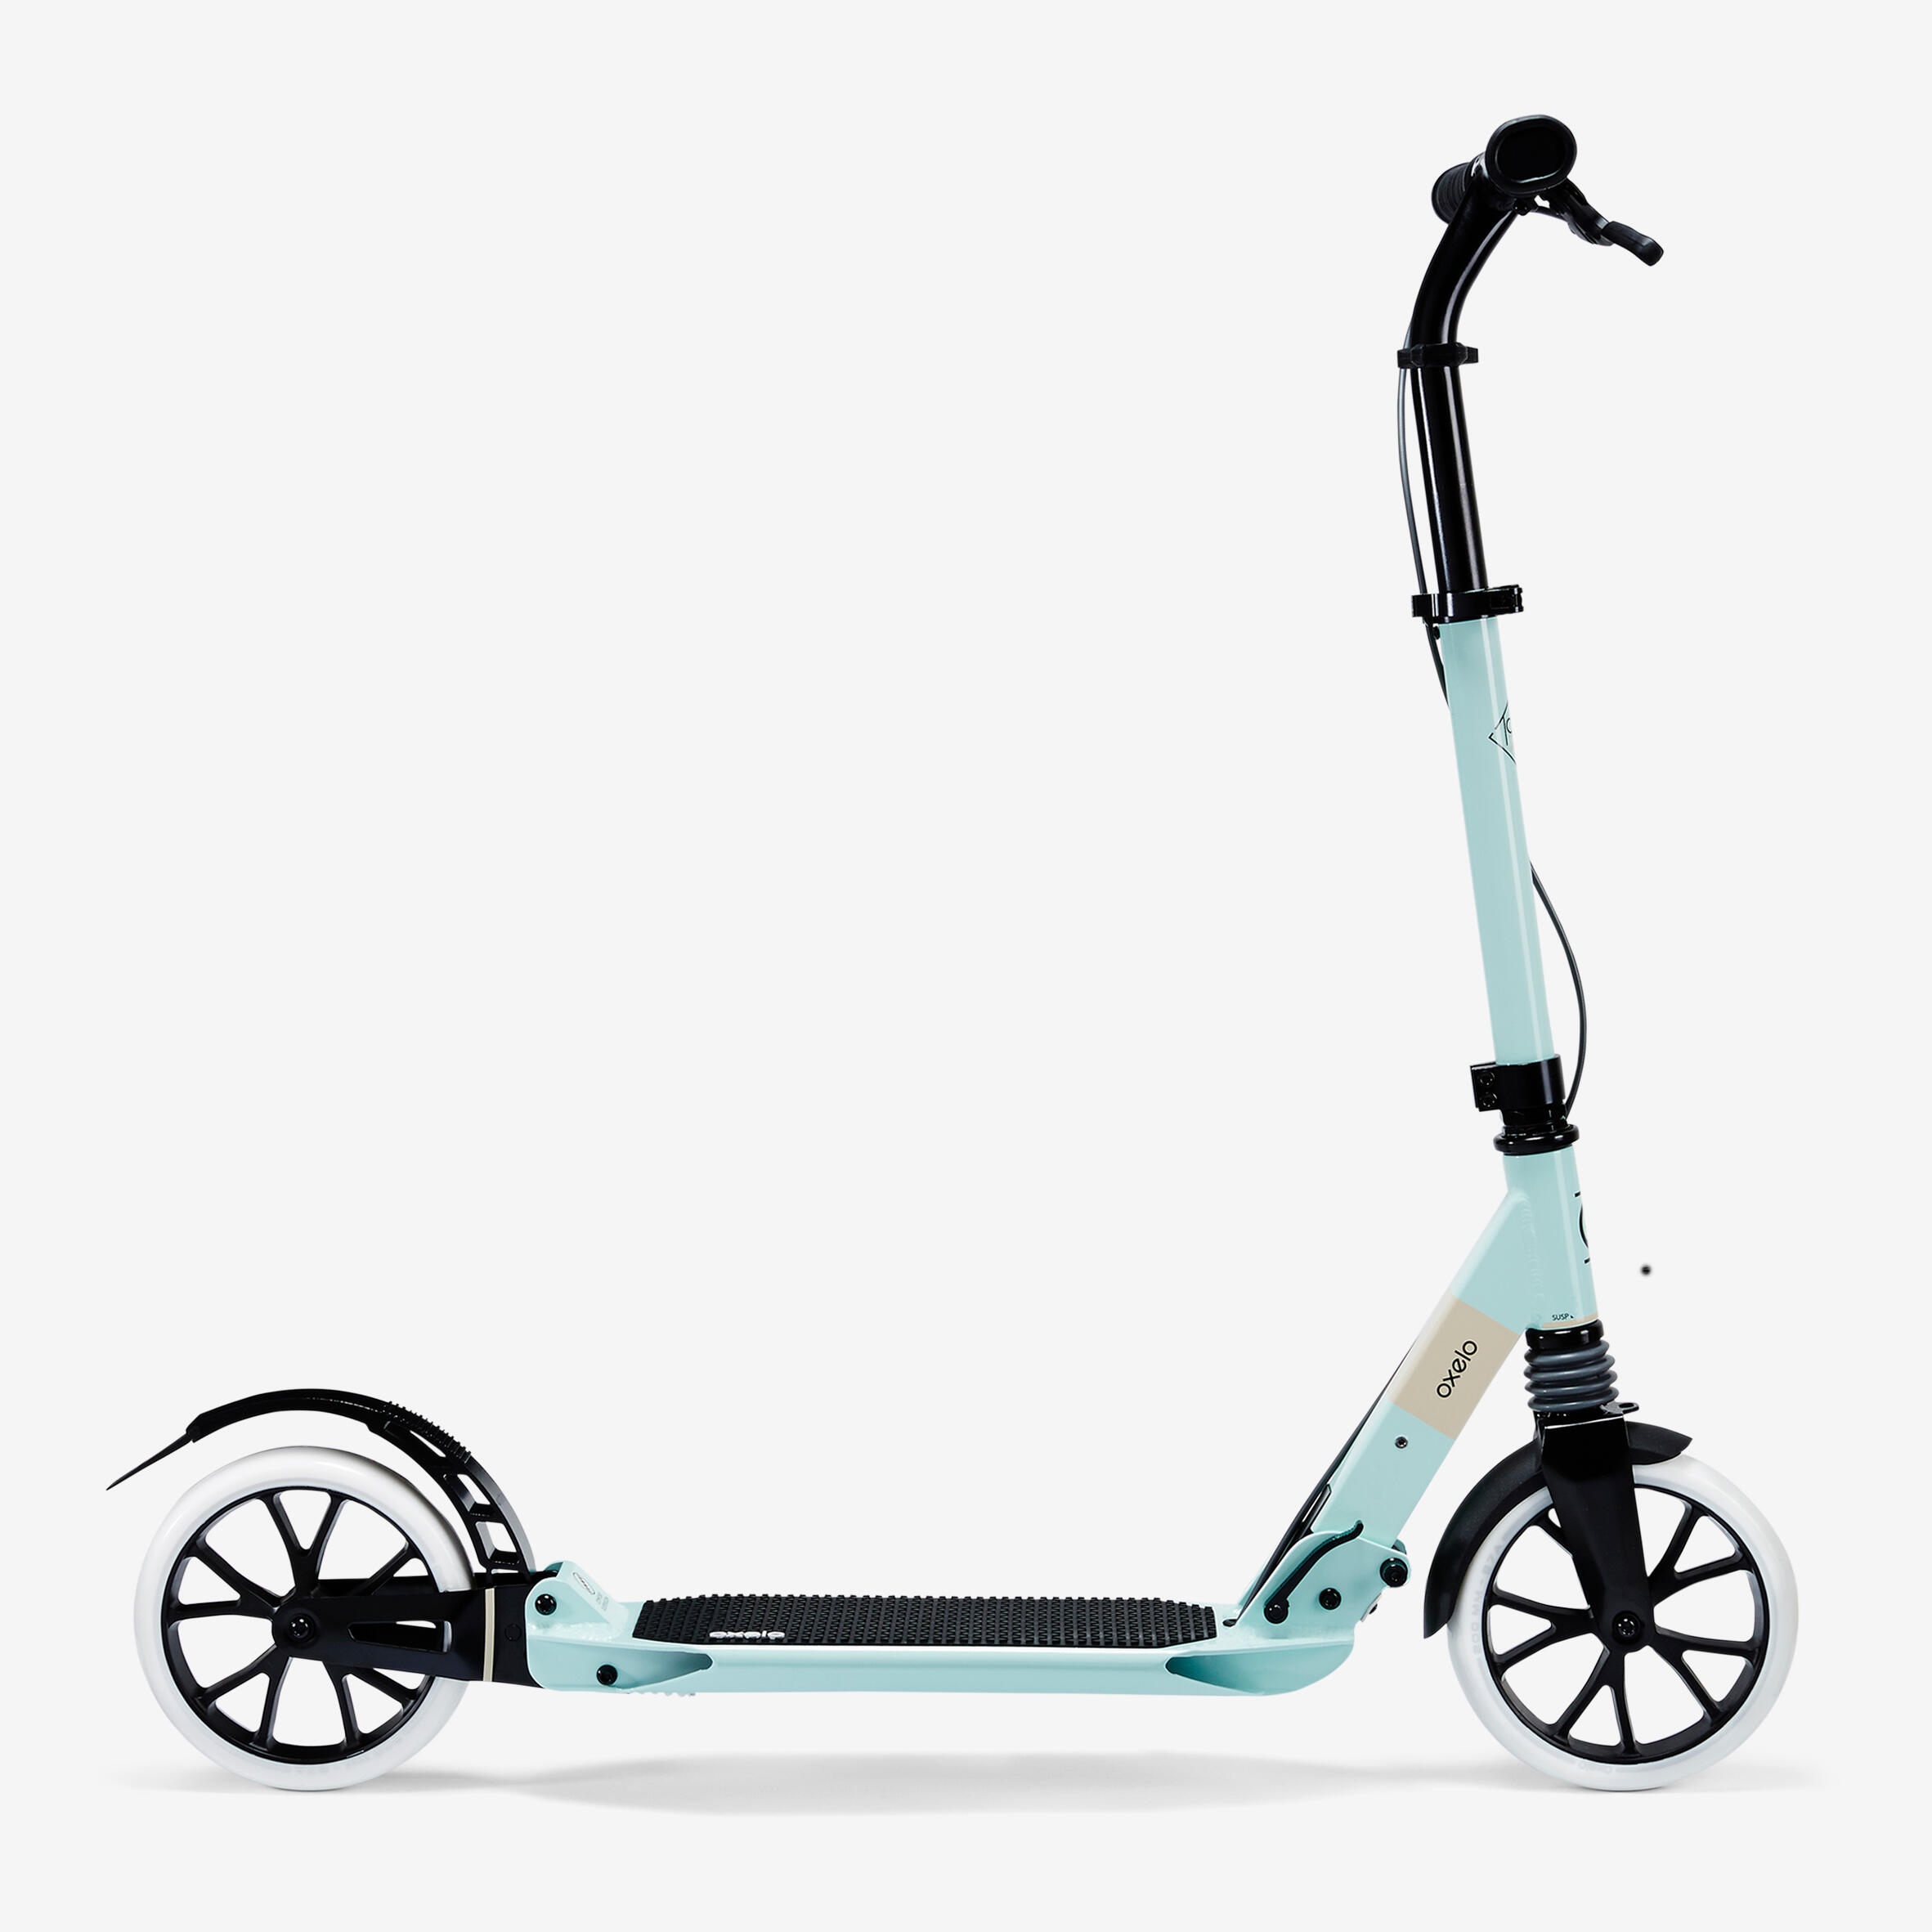 Town 7 XL Adult Scooter with Suspension 